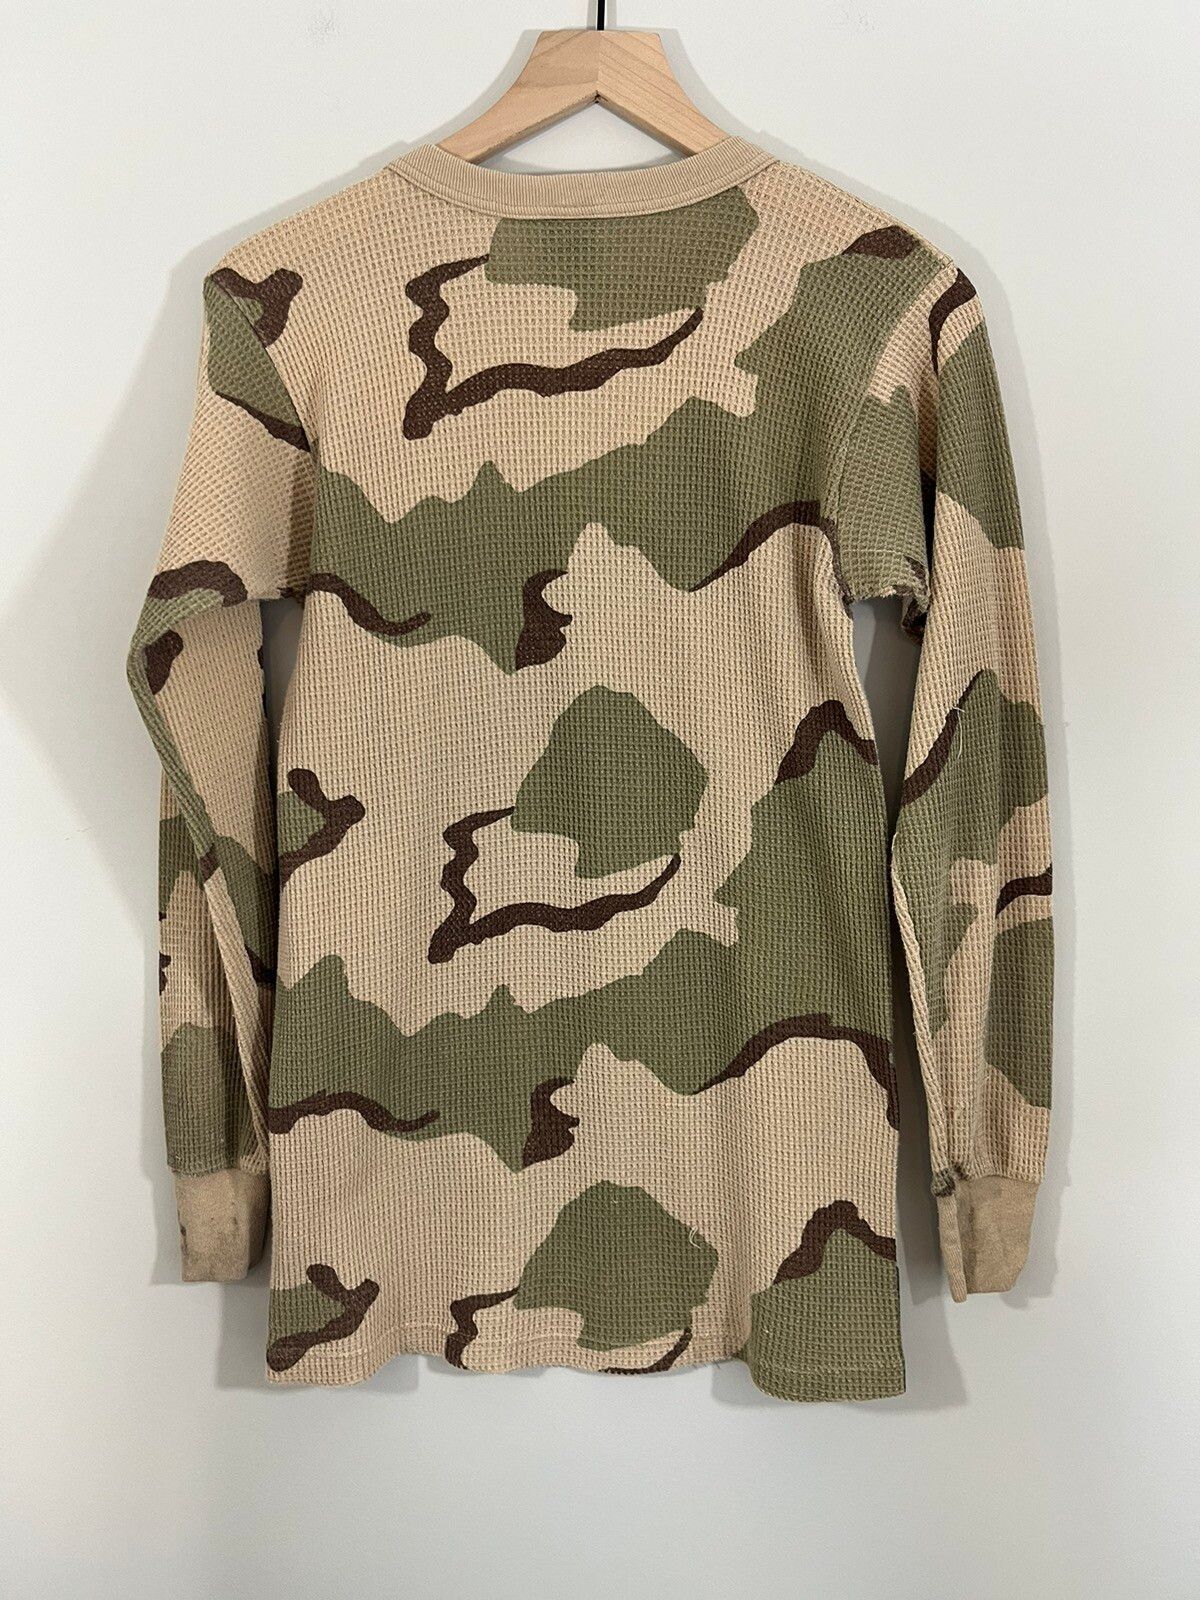 Vintage Vintage Distressed Thermal Knit Camo Stained Long Sleeve Size US S / EU 44-46 / 1 - 9 Thumbnail